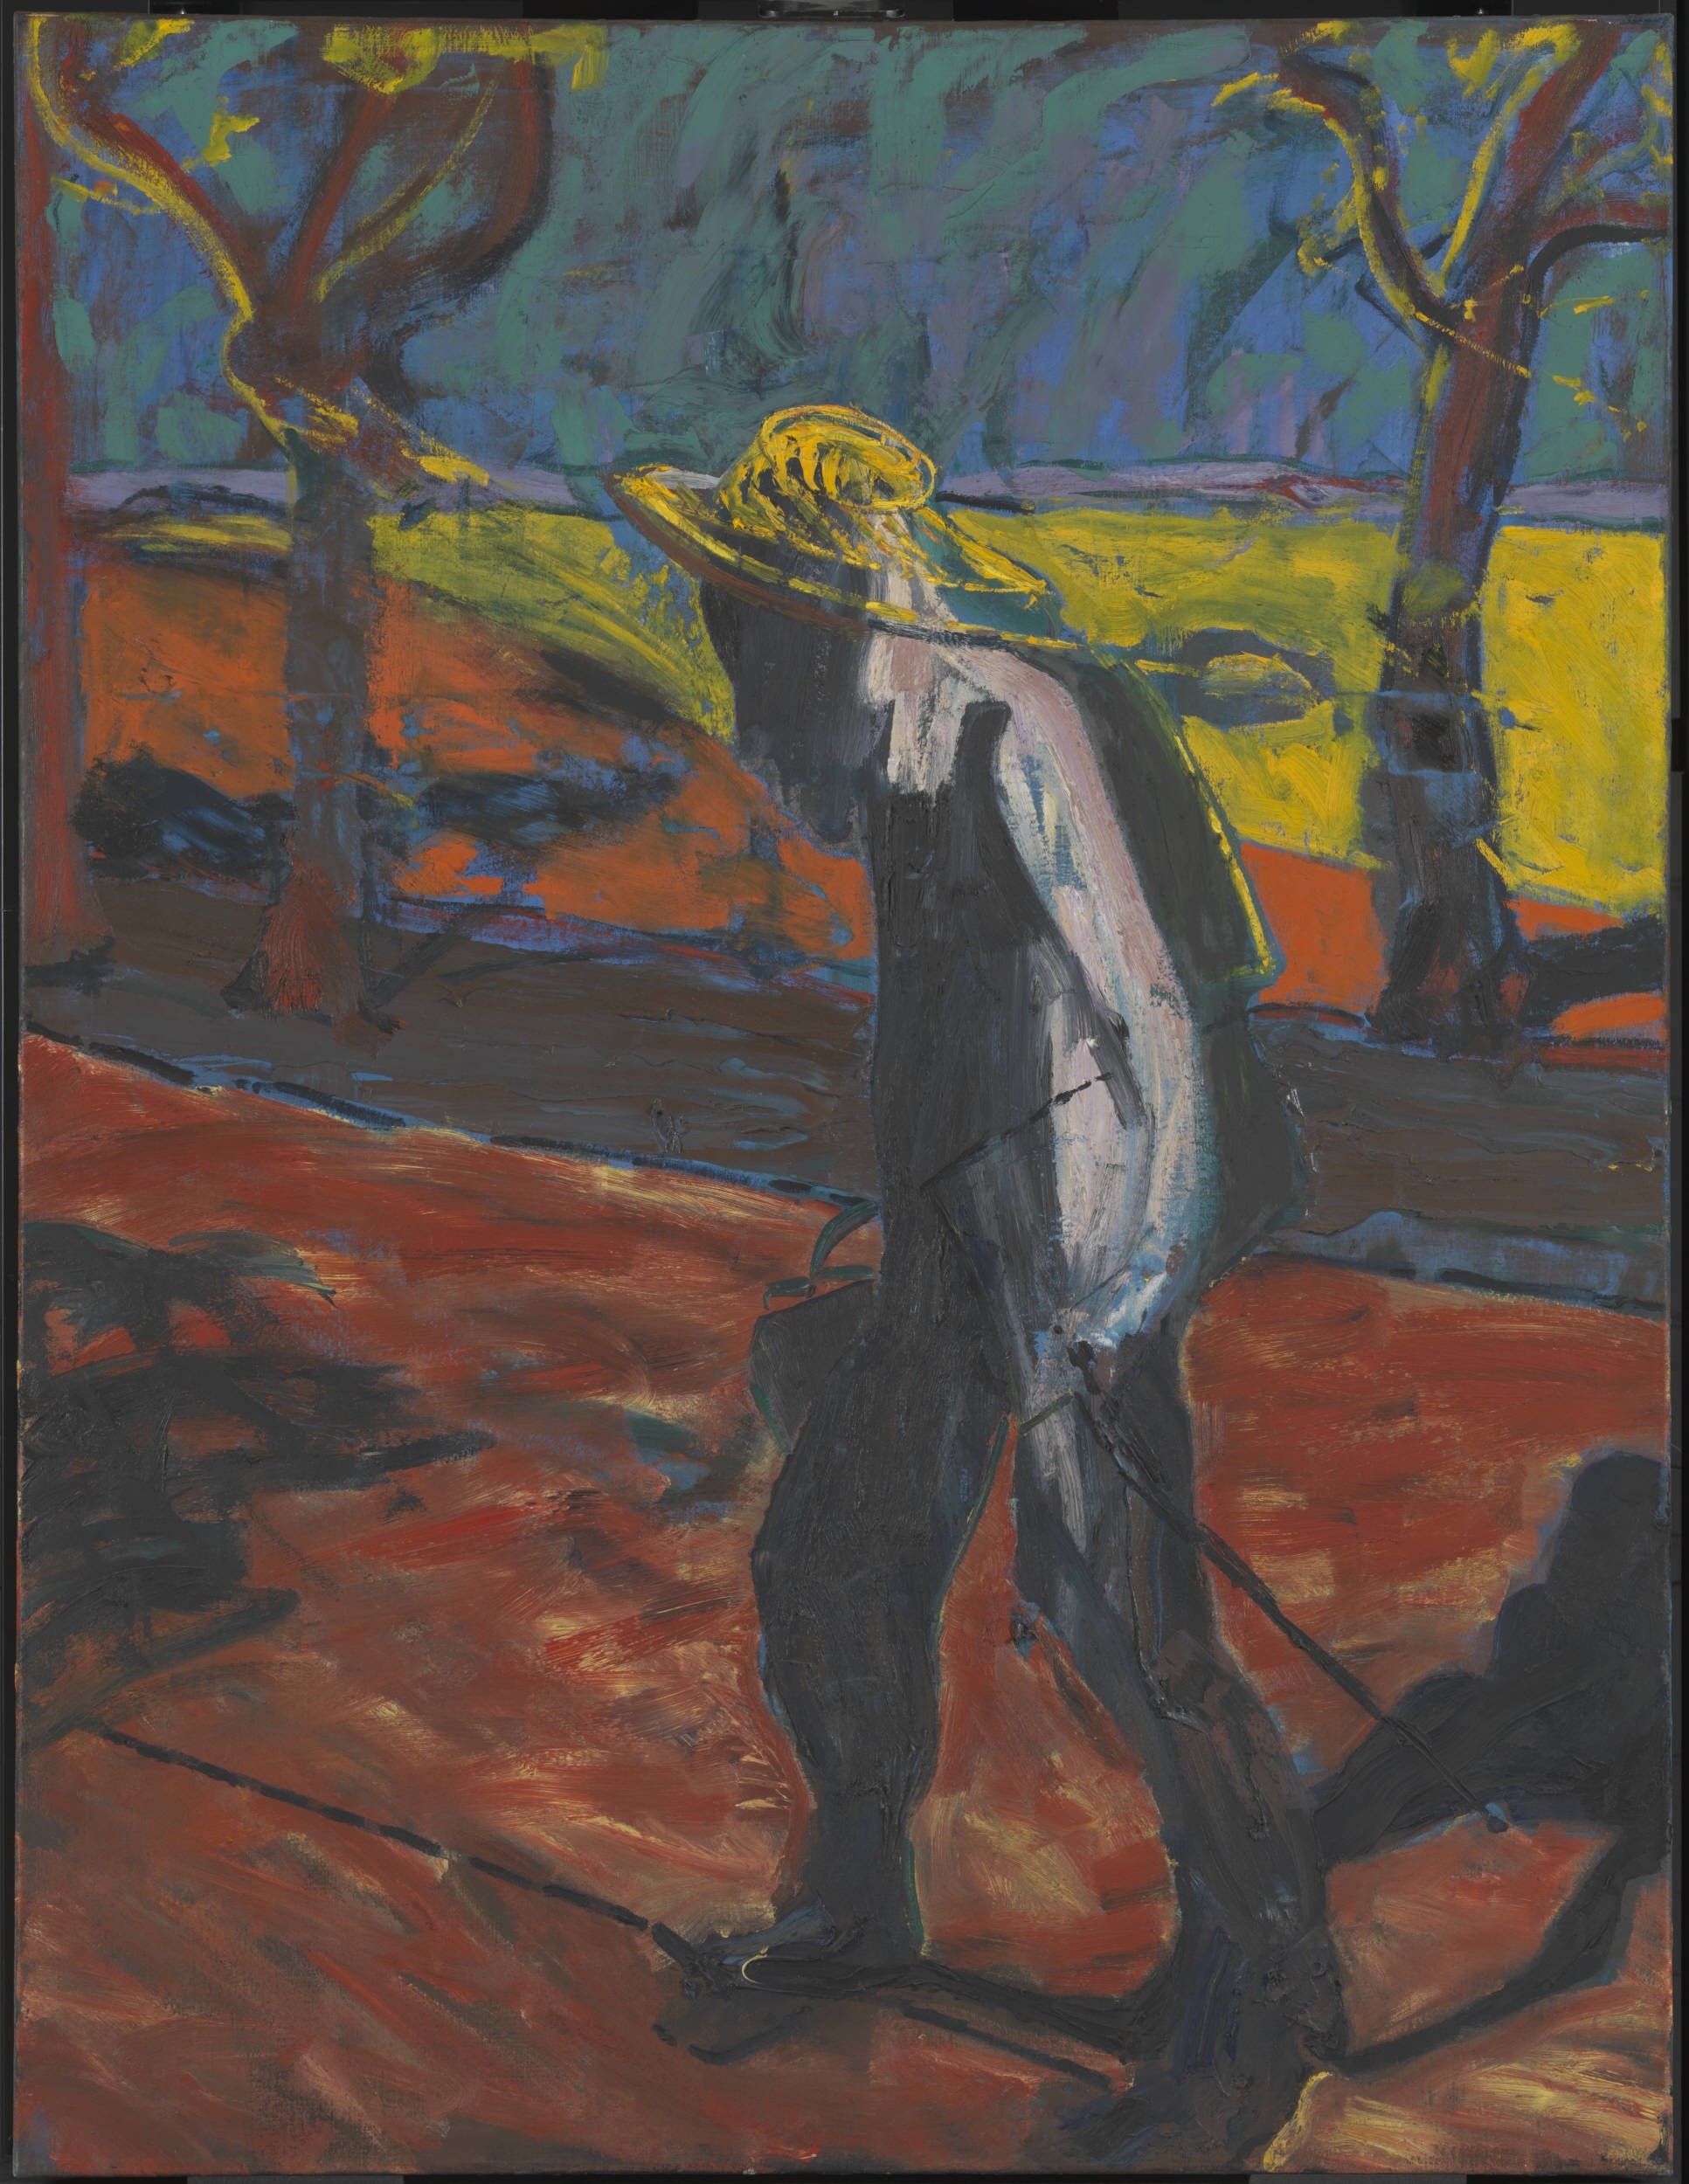 Francis Bacon's Study for Portrait of Van Gogh IV, 1957 (The Estate of Francis Bacon)